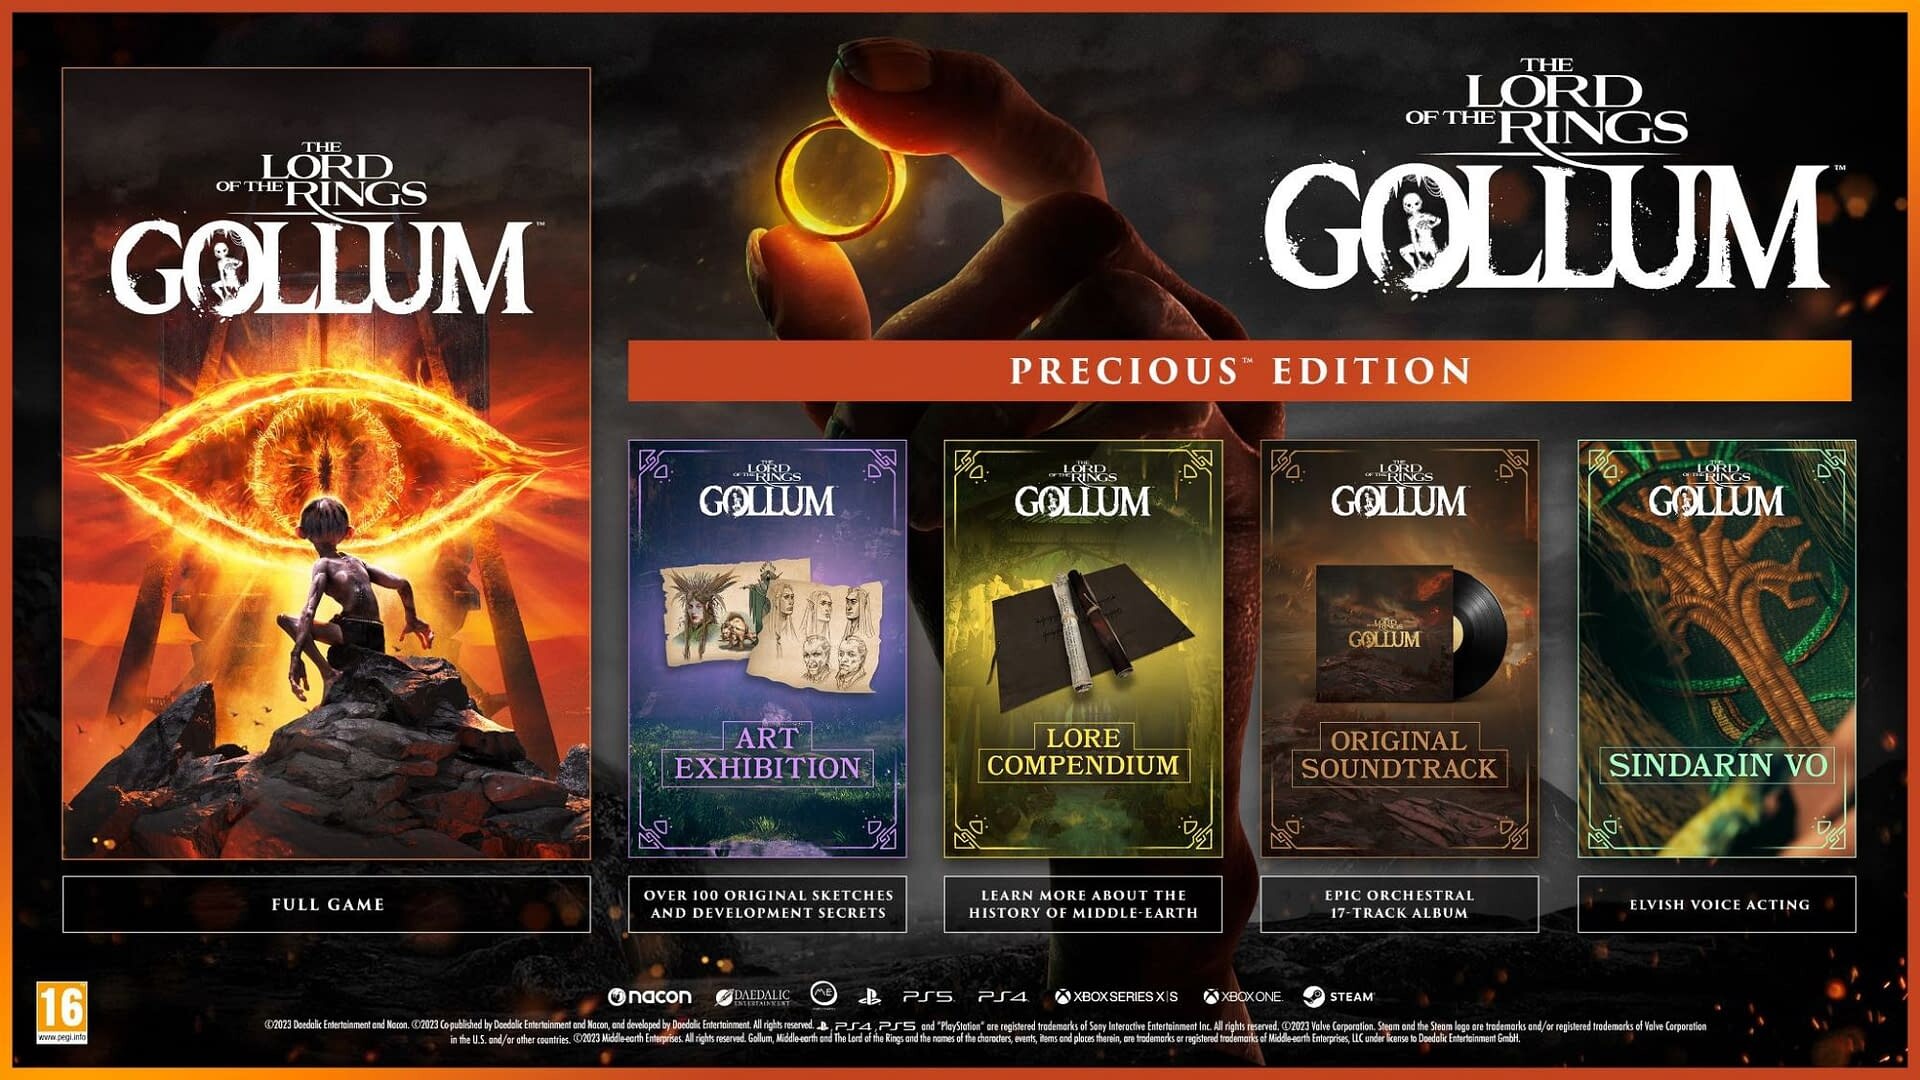 New NACON Connect Announced For March 9th; Will Provide Updates For The Lord  Of The Rings: Gollum And More